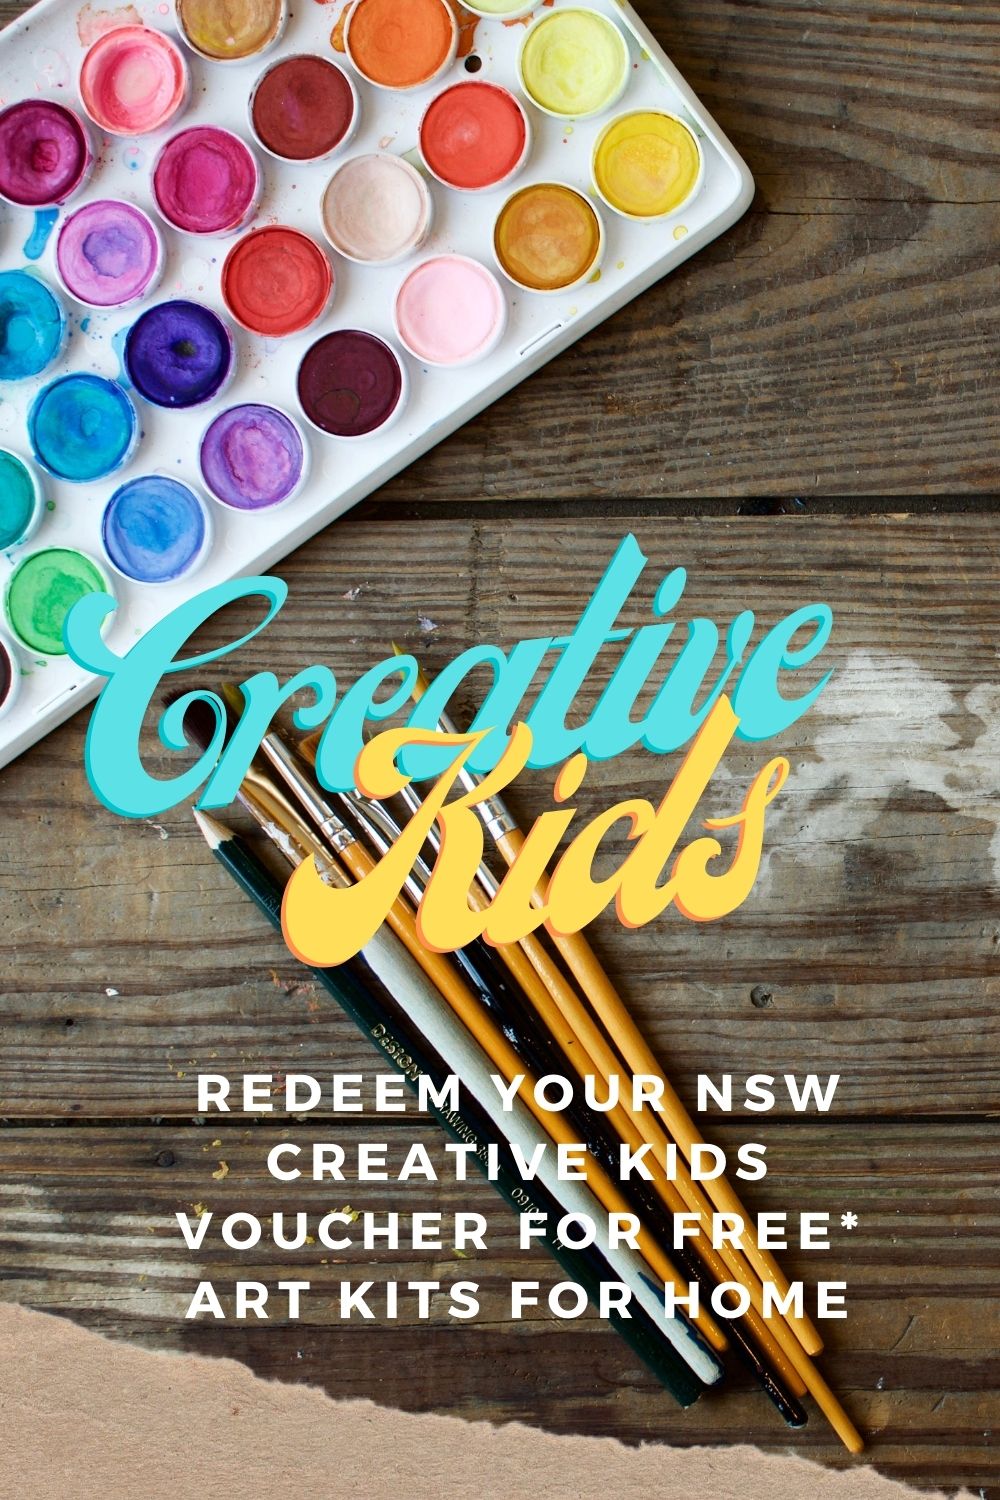 Creative Kids Voucher for NSW Kids : Creative Kits for Home